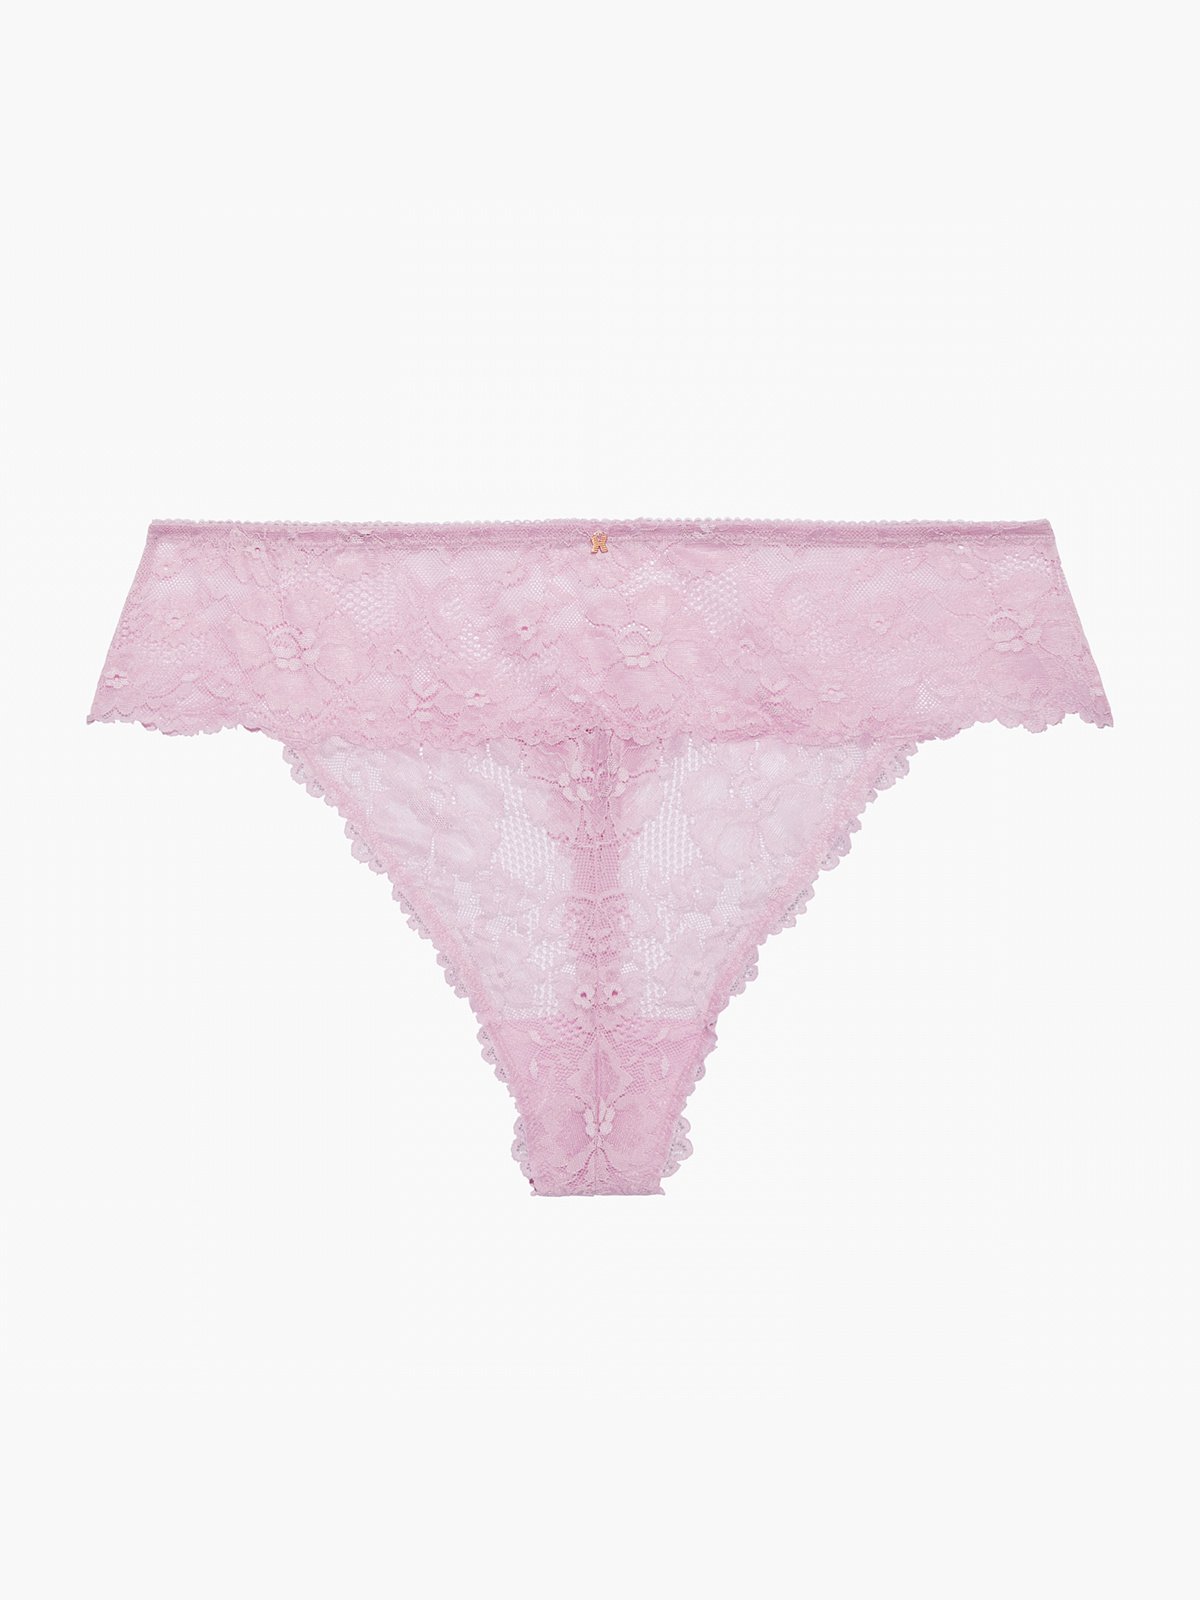 Floral Lace High-Waist Thong in Pink